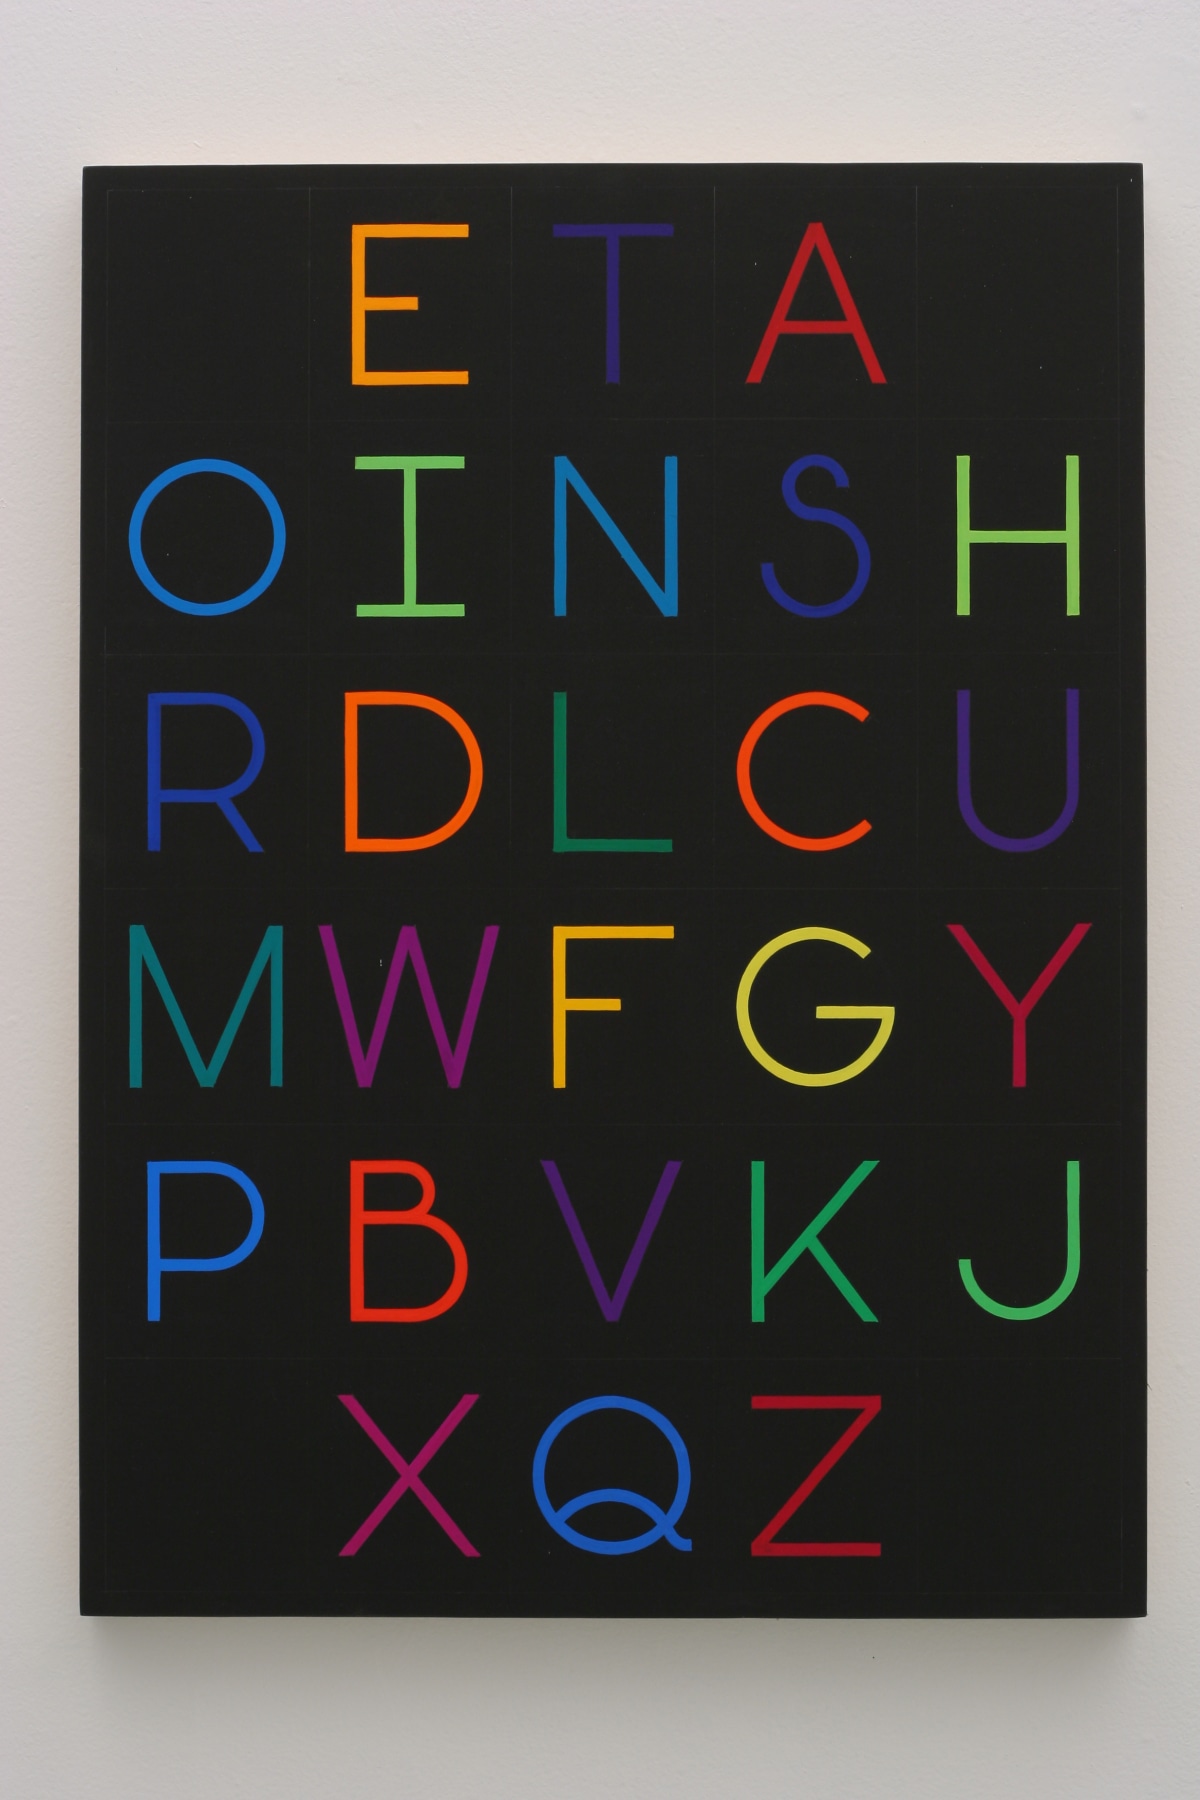 Written alphabet, with multiple colors on black background